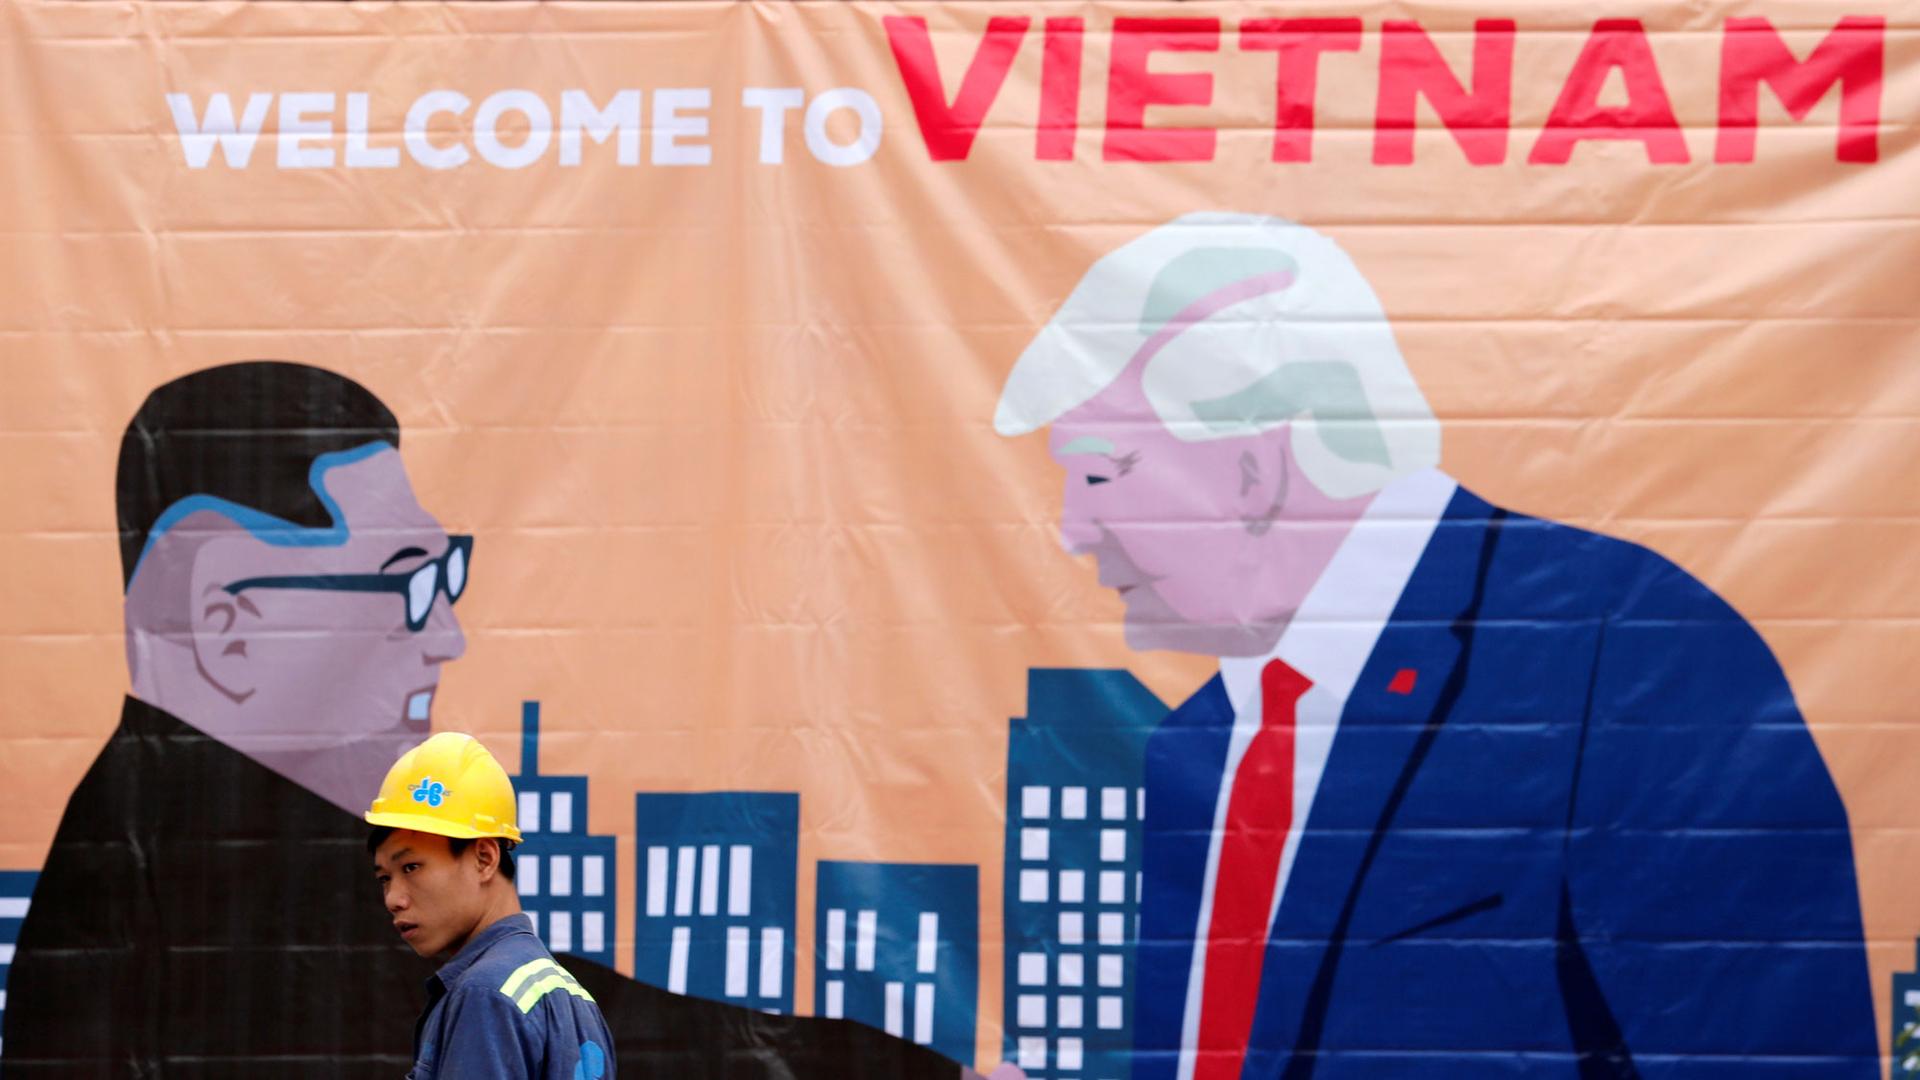 A man is shown wearing a construction hard hat walking past a banner illustration depicting North Korean leader Kim Jong-un and US President Donald Trump